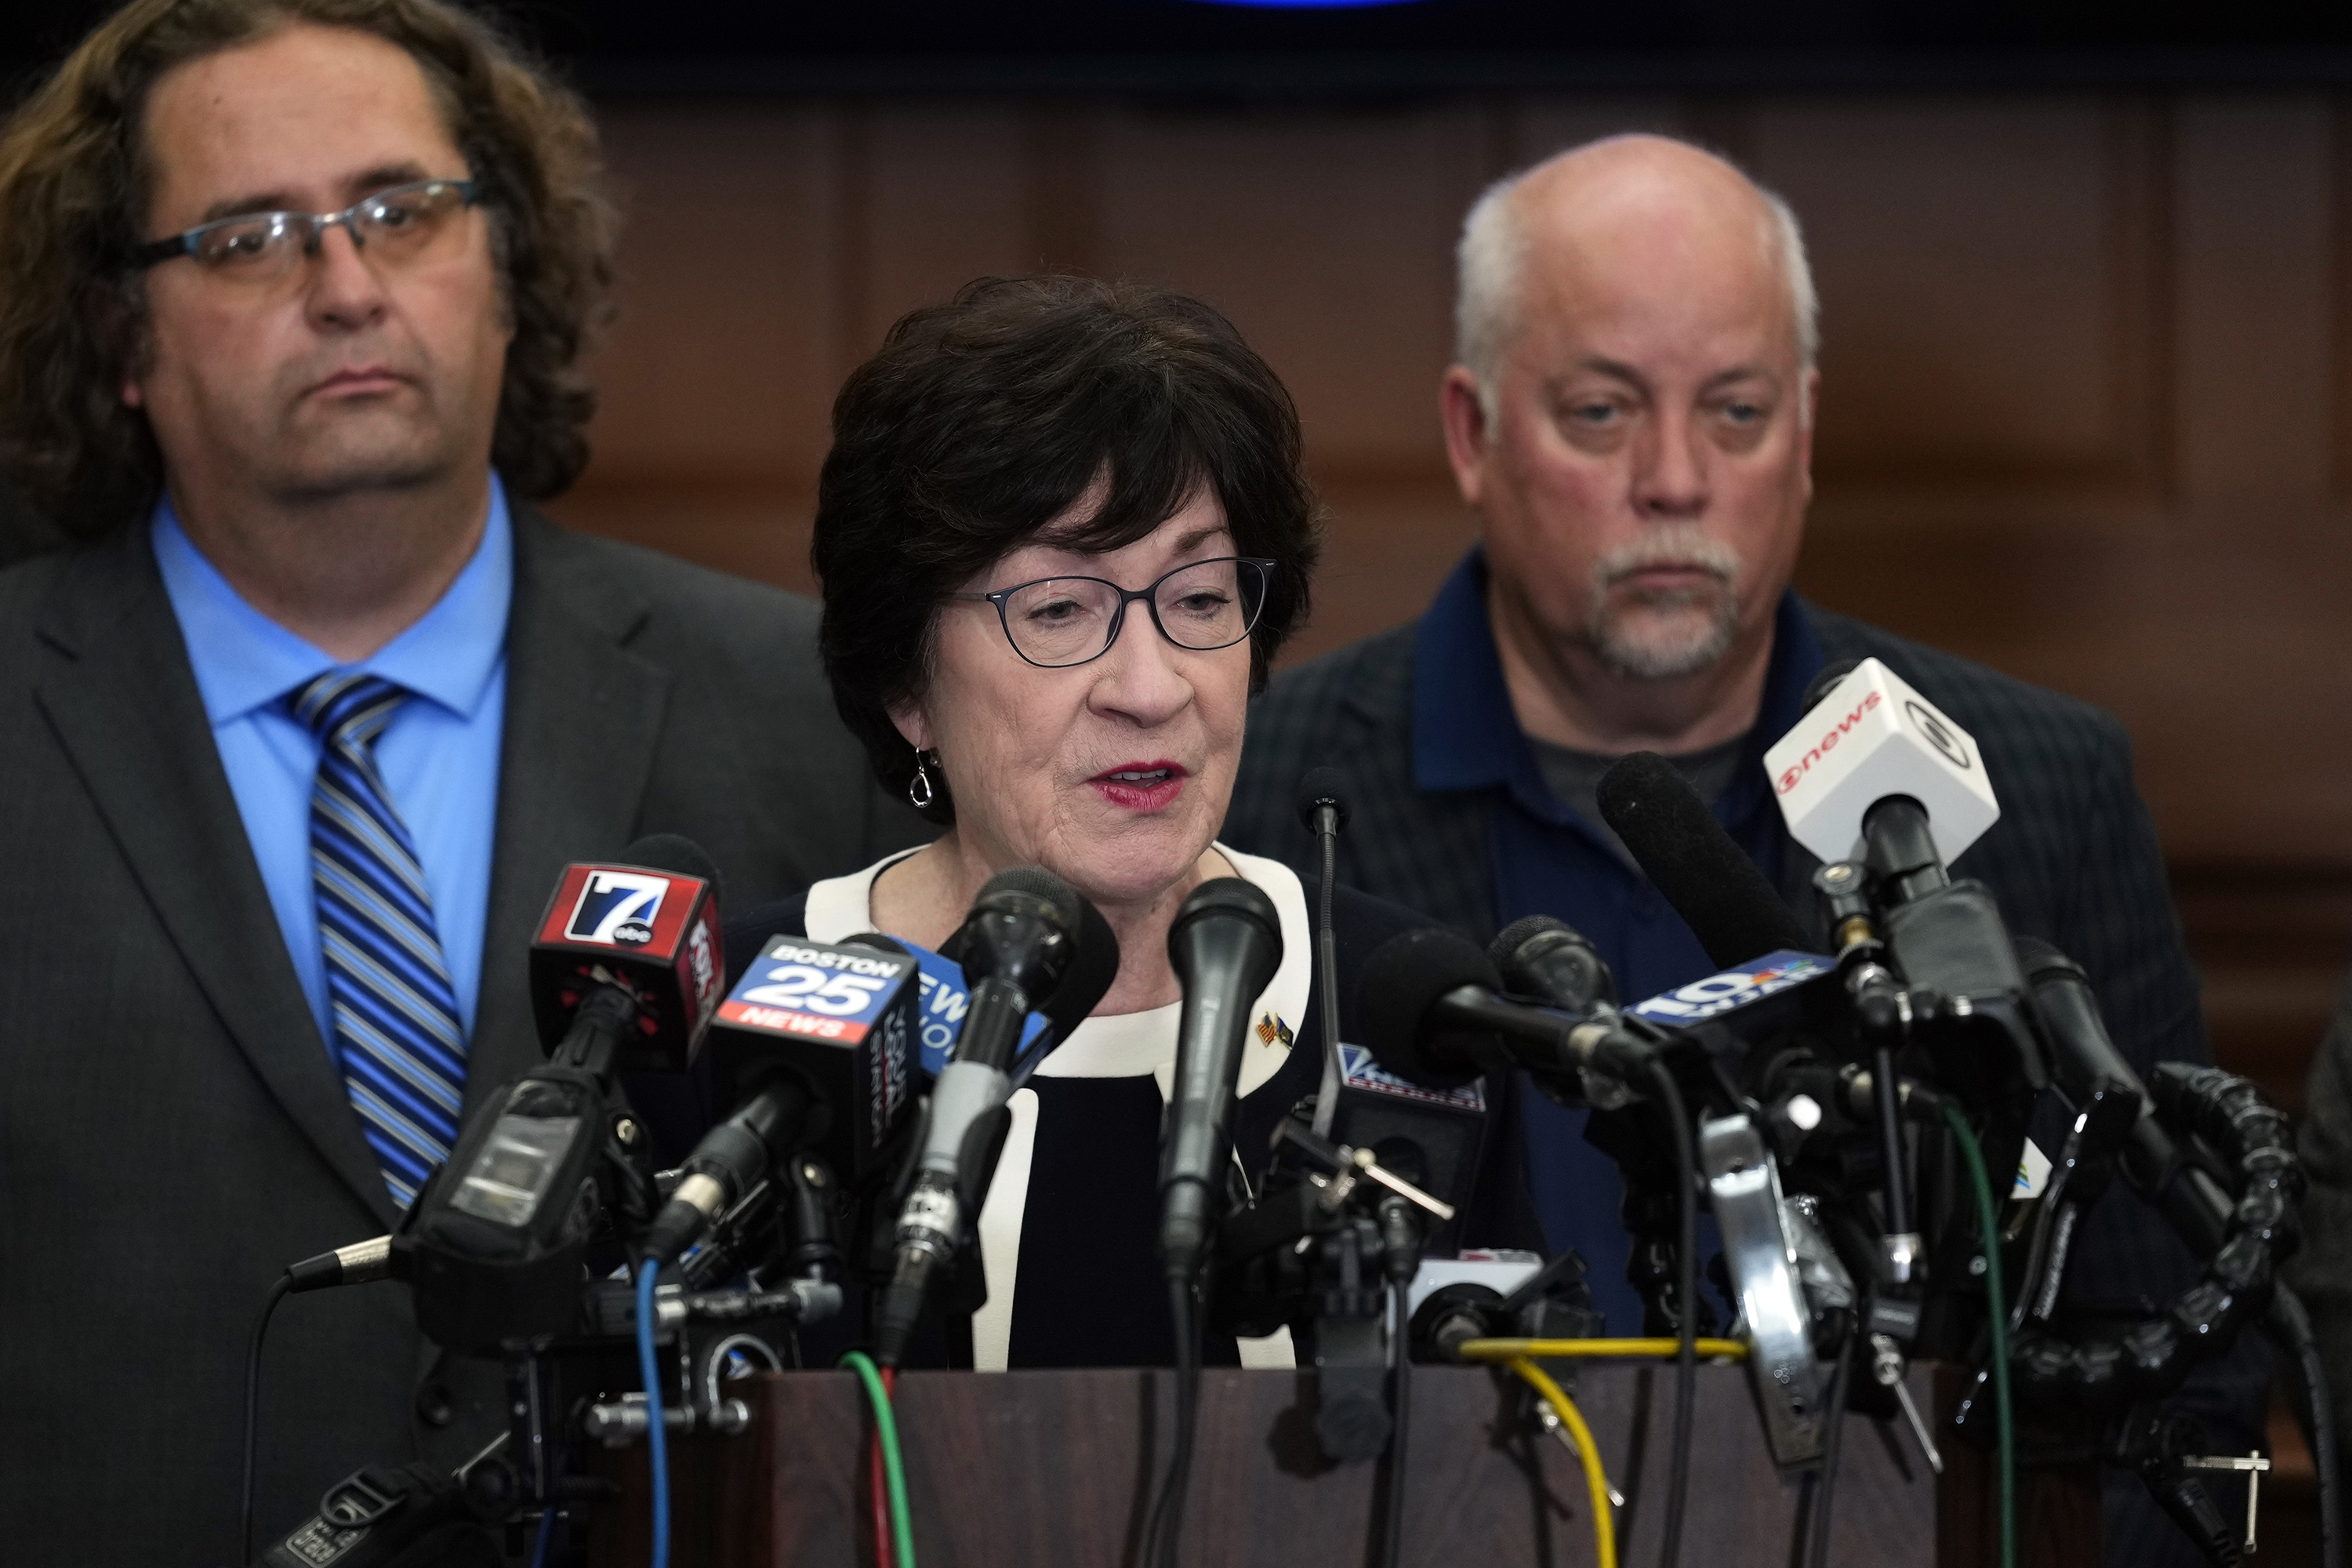 Sen. Susan Collins, R-Maine, speaks with members of the media in the aftermath of a mass shootings in Lewiston, Maine, on October 26.